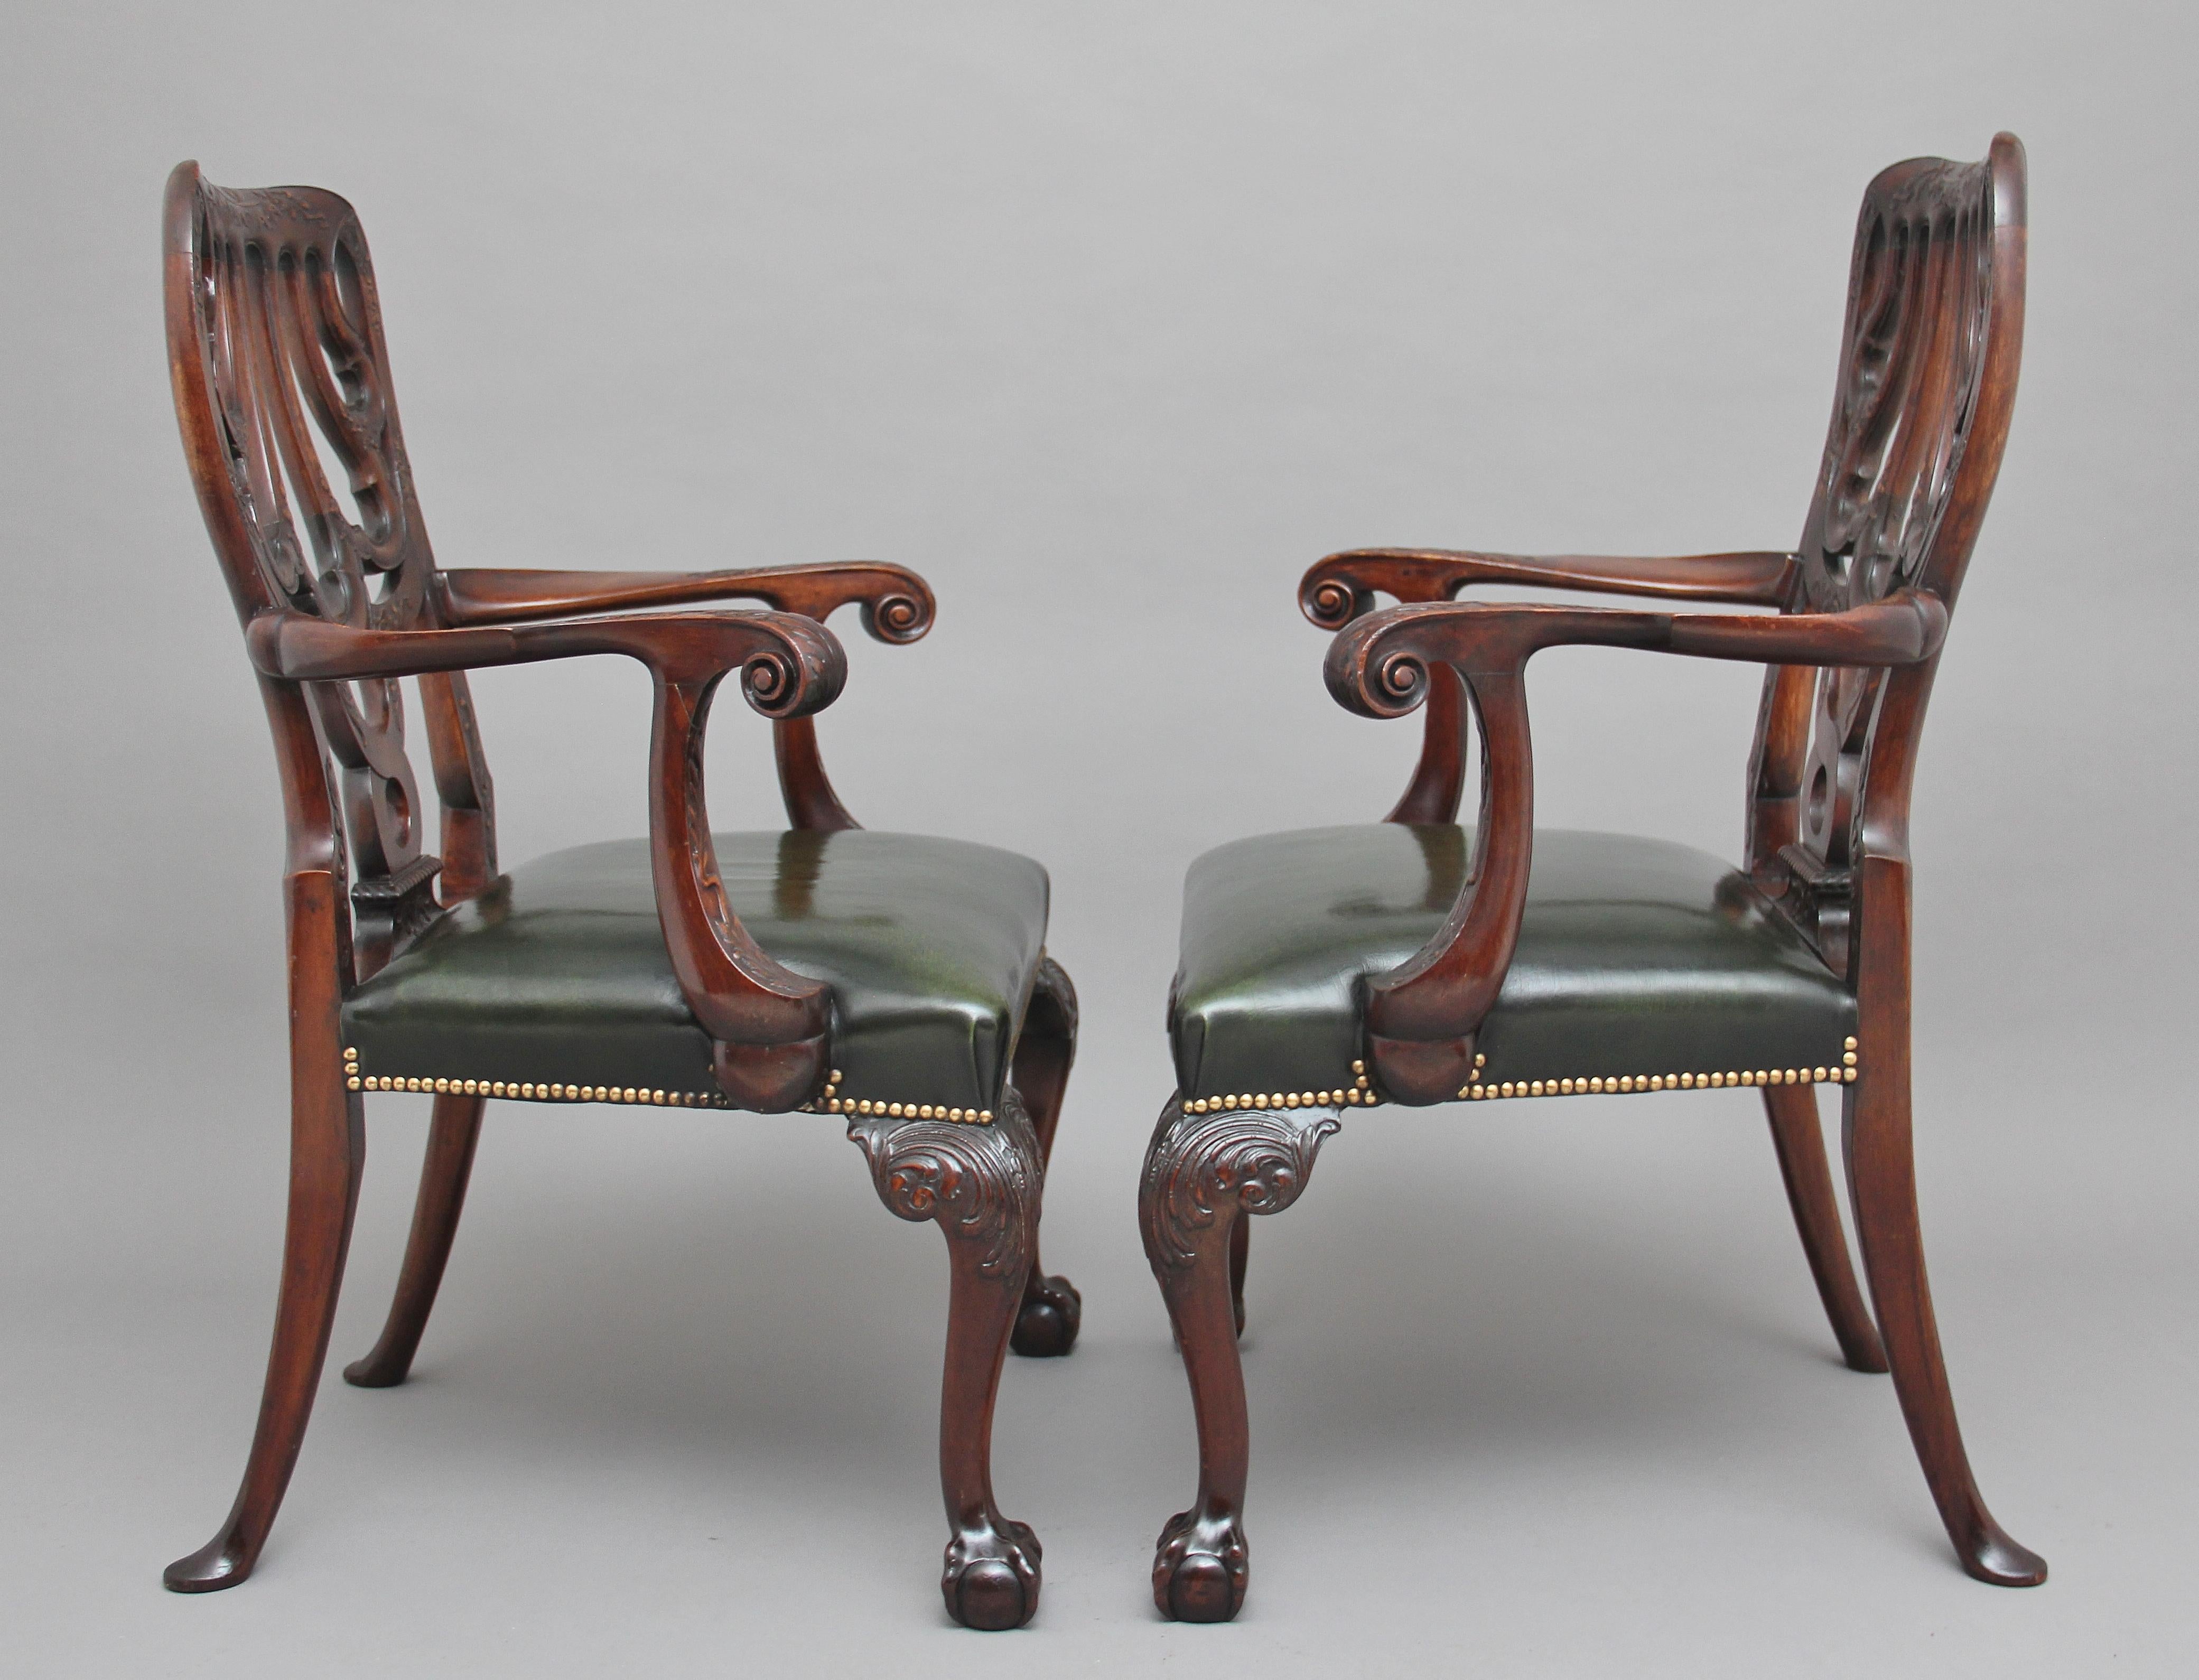 A pair of 19th century carved mahogany armchairs in the Chippendale style, superb quality and lovely dense timber, the supports carved with flower foliage, at the centre is a lovely shaped and carved back splat, the shaped curved arms terminating